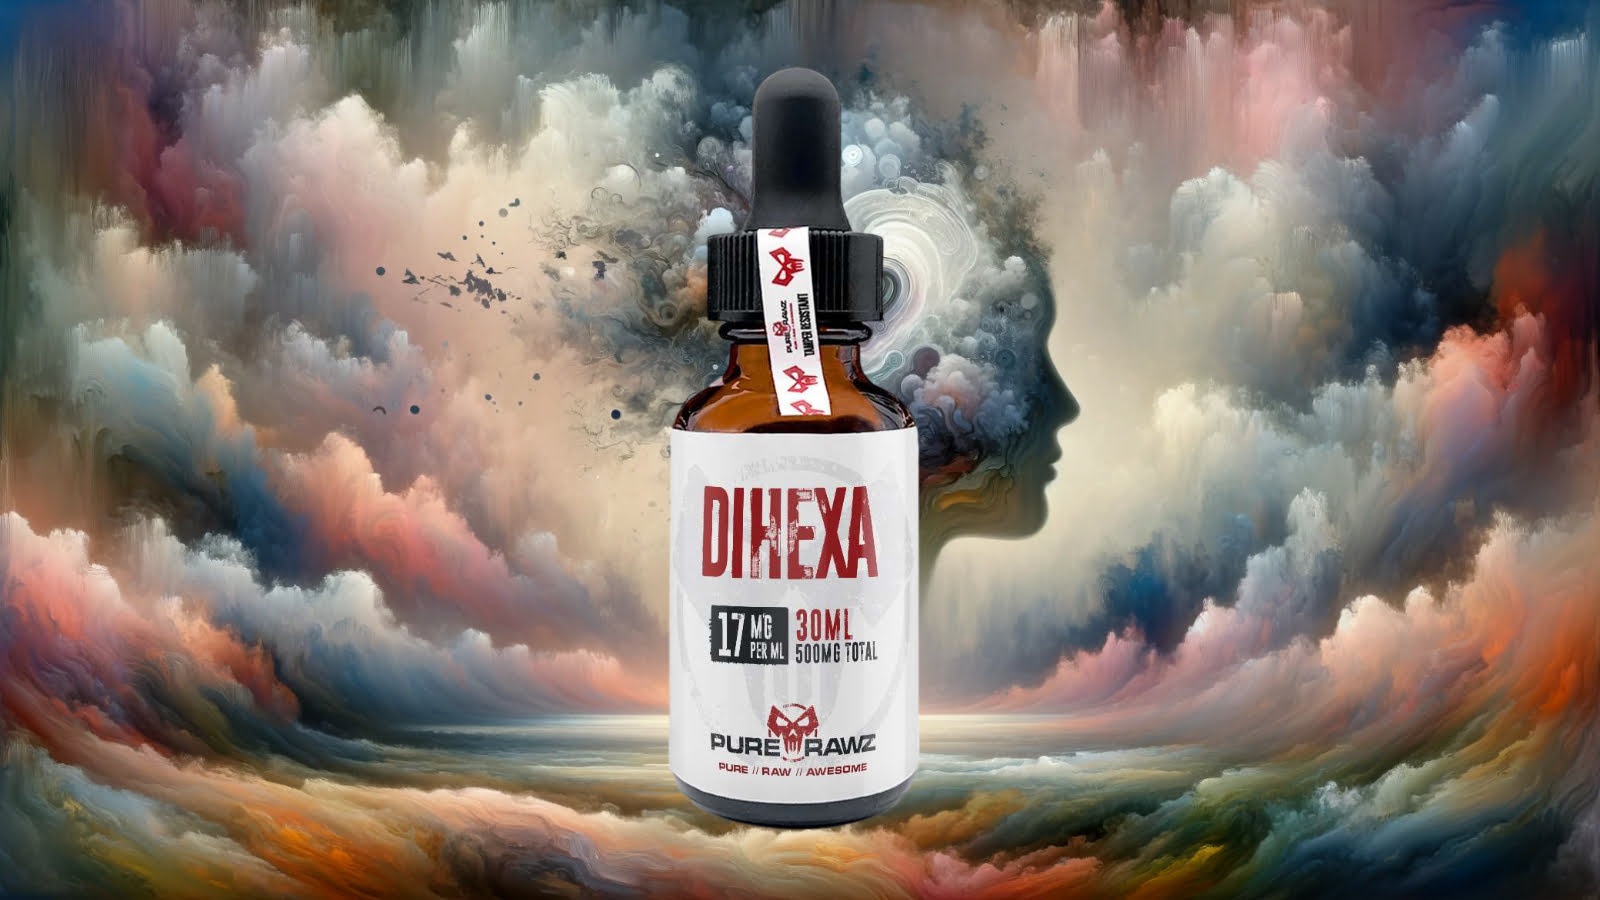 Overview of Dihexa's cognitive benefits, uses, and potential side effects.